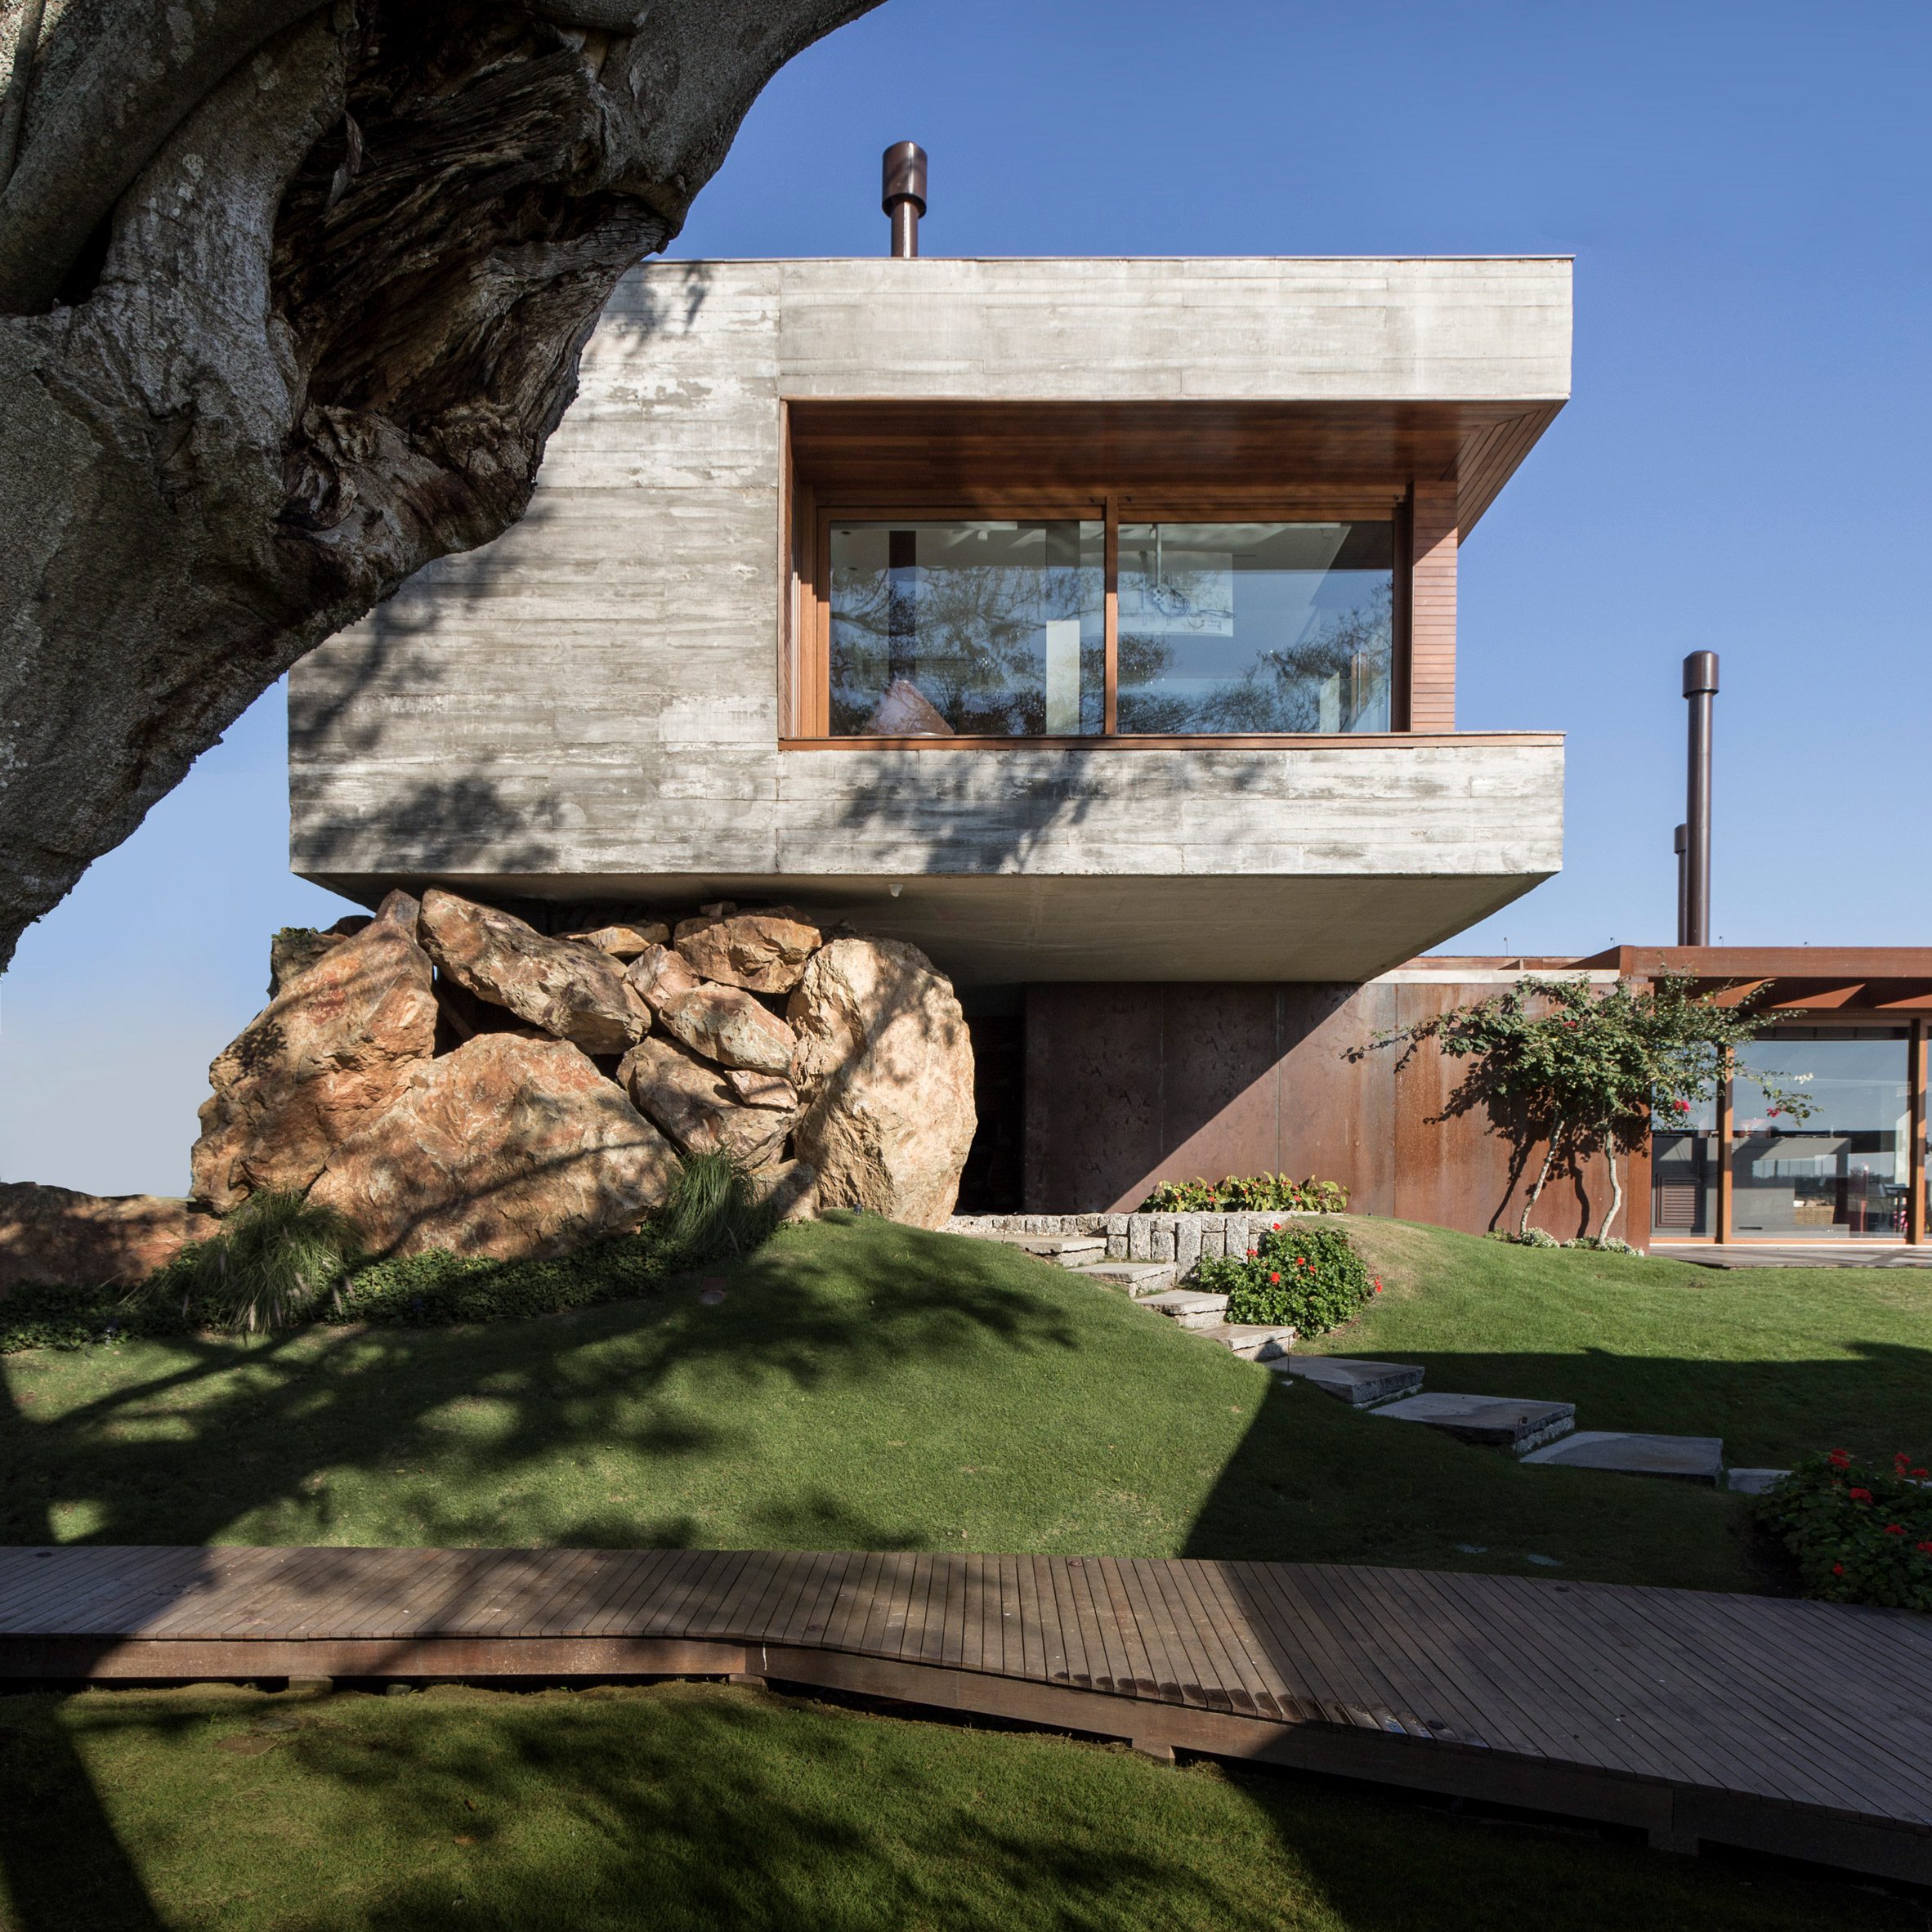 Concrete house with window cut-out cantilevering over a grass garden and balanced on a large rock